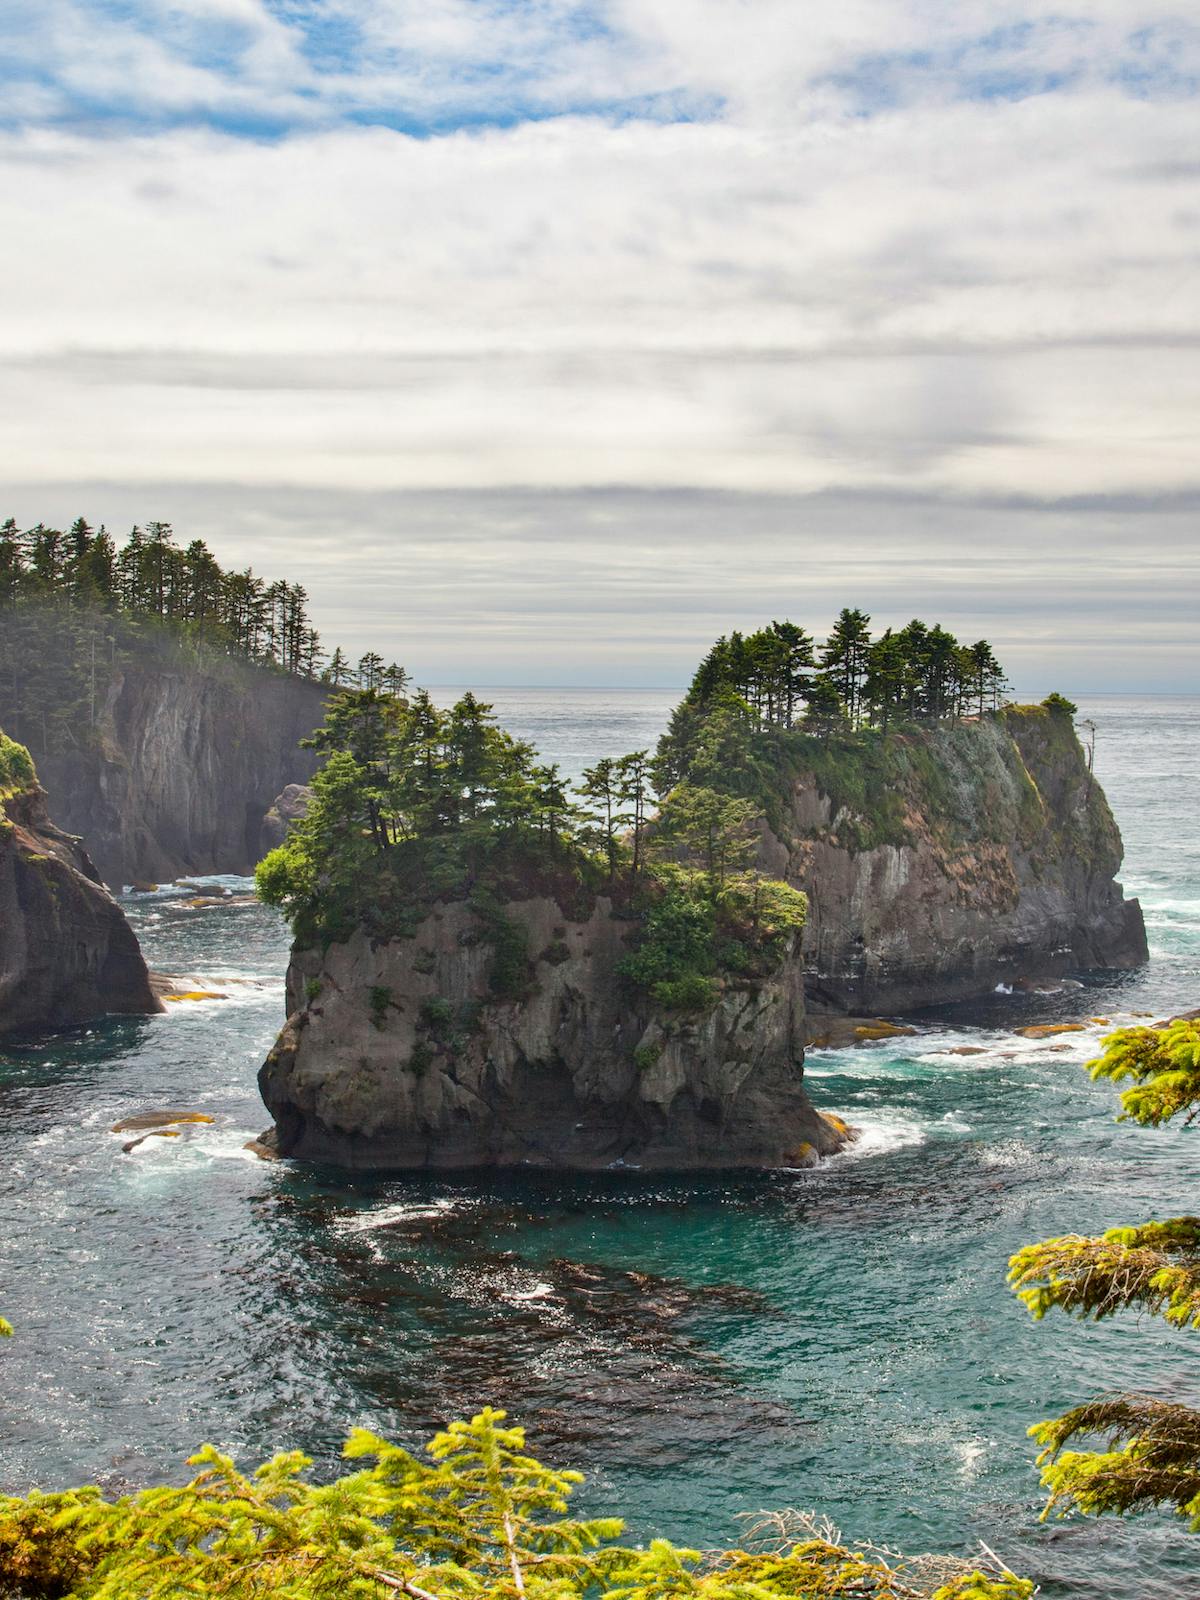 a close up of a rock next to a body of water with McWay Falls in the background